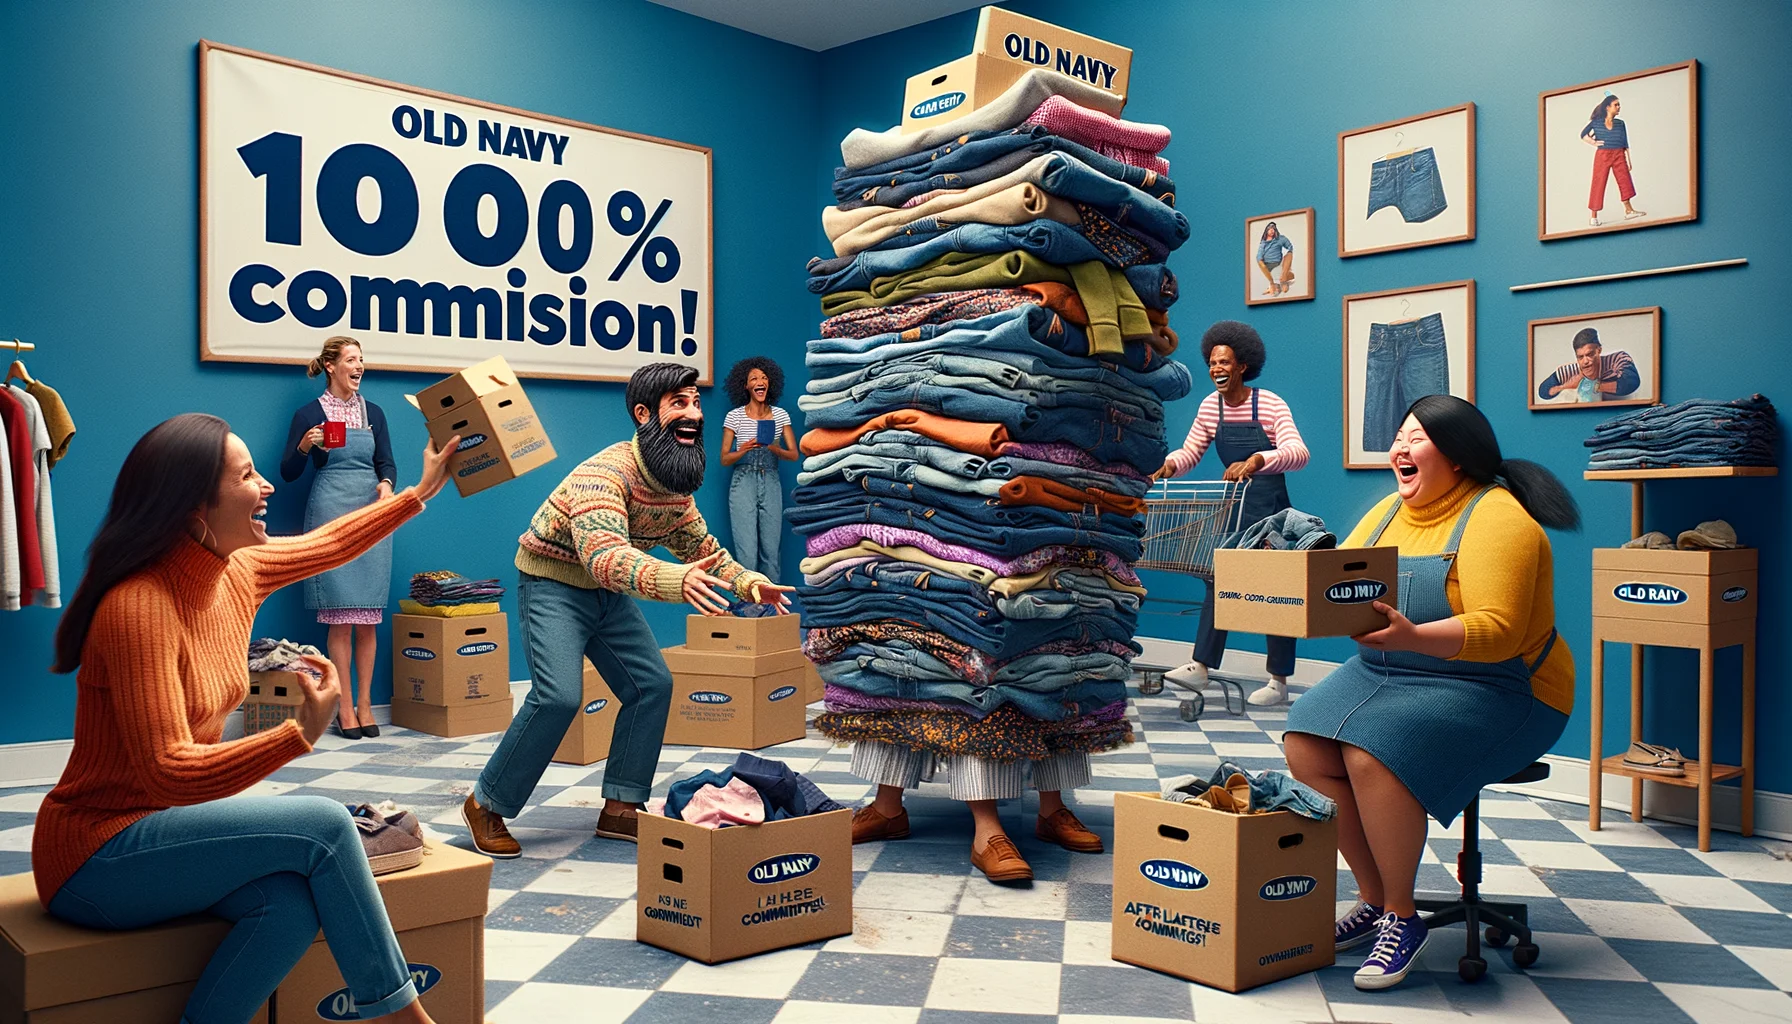 Generate a humorous, realistic image representing the Old Navy Affiliate Program. The scene is set in a quirky retail store, with customers wearing oversized, comically patterned clothing. One Caucasian female cashier is playfully struggling to keep up with oddly-shaped cardboard boxes filled with clothing. Beside her, a Middle-Eastern male is hilariously attempting to balance a tall stack of jeans on his head. In the background, a Black female and a South Asian male, both holding large shopping bags, are laughing heartily. A sign on the wall humorously exaggerates the affiliates’ cut, displaying '1000% commission!' in bold, playful letters.